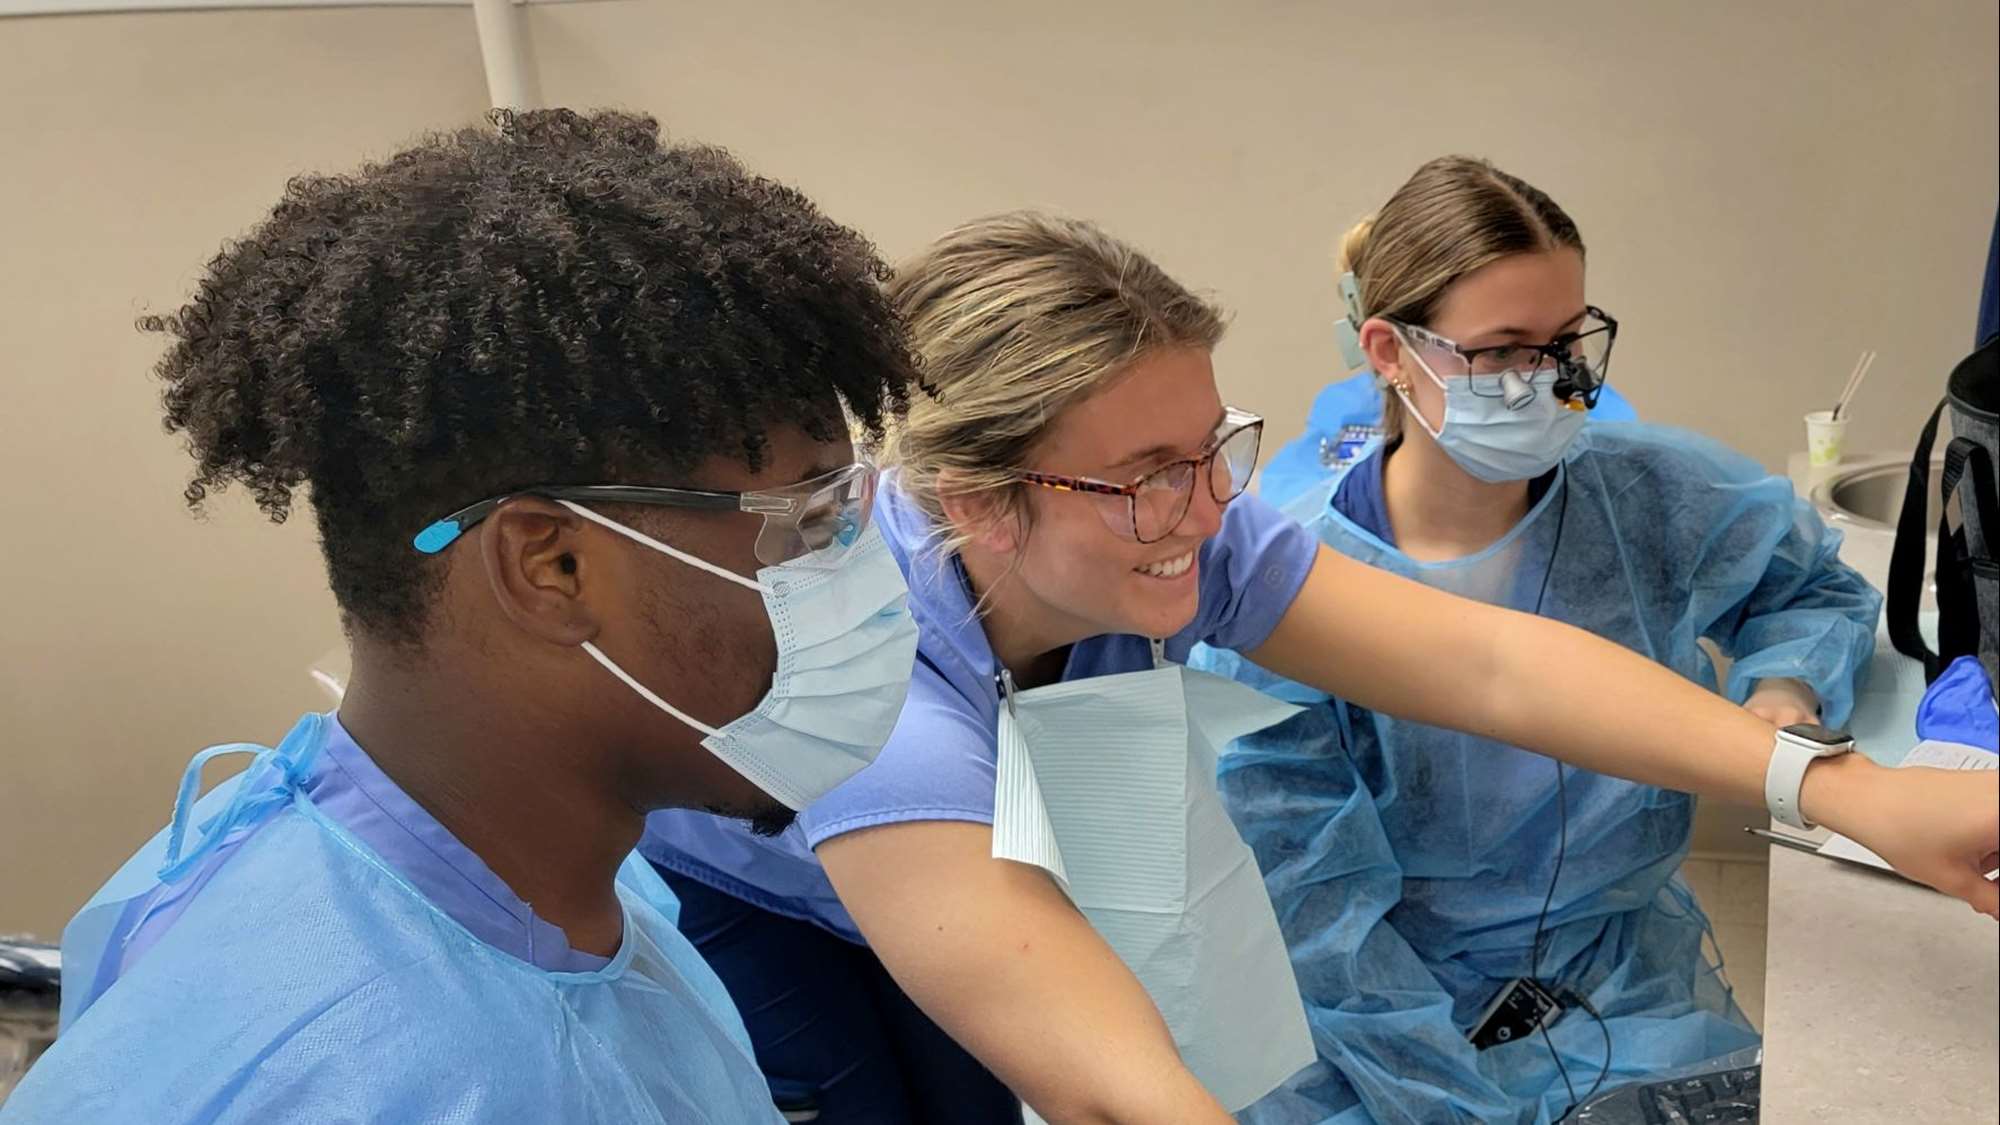 Dental hygiene students work together in the clinic.